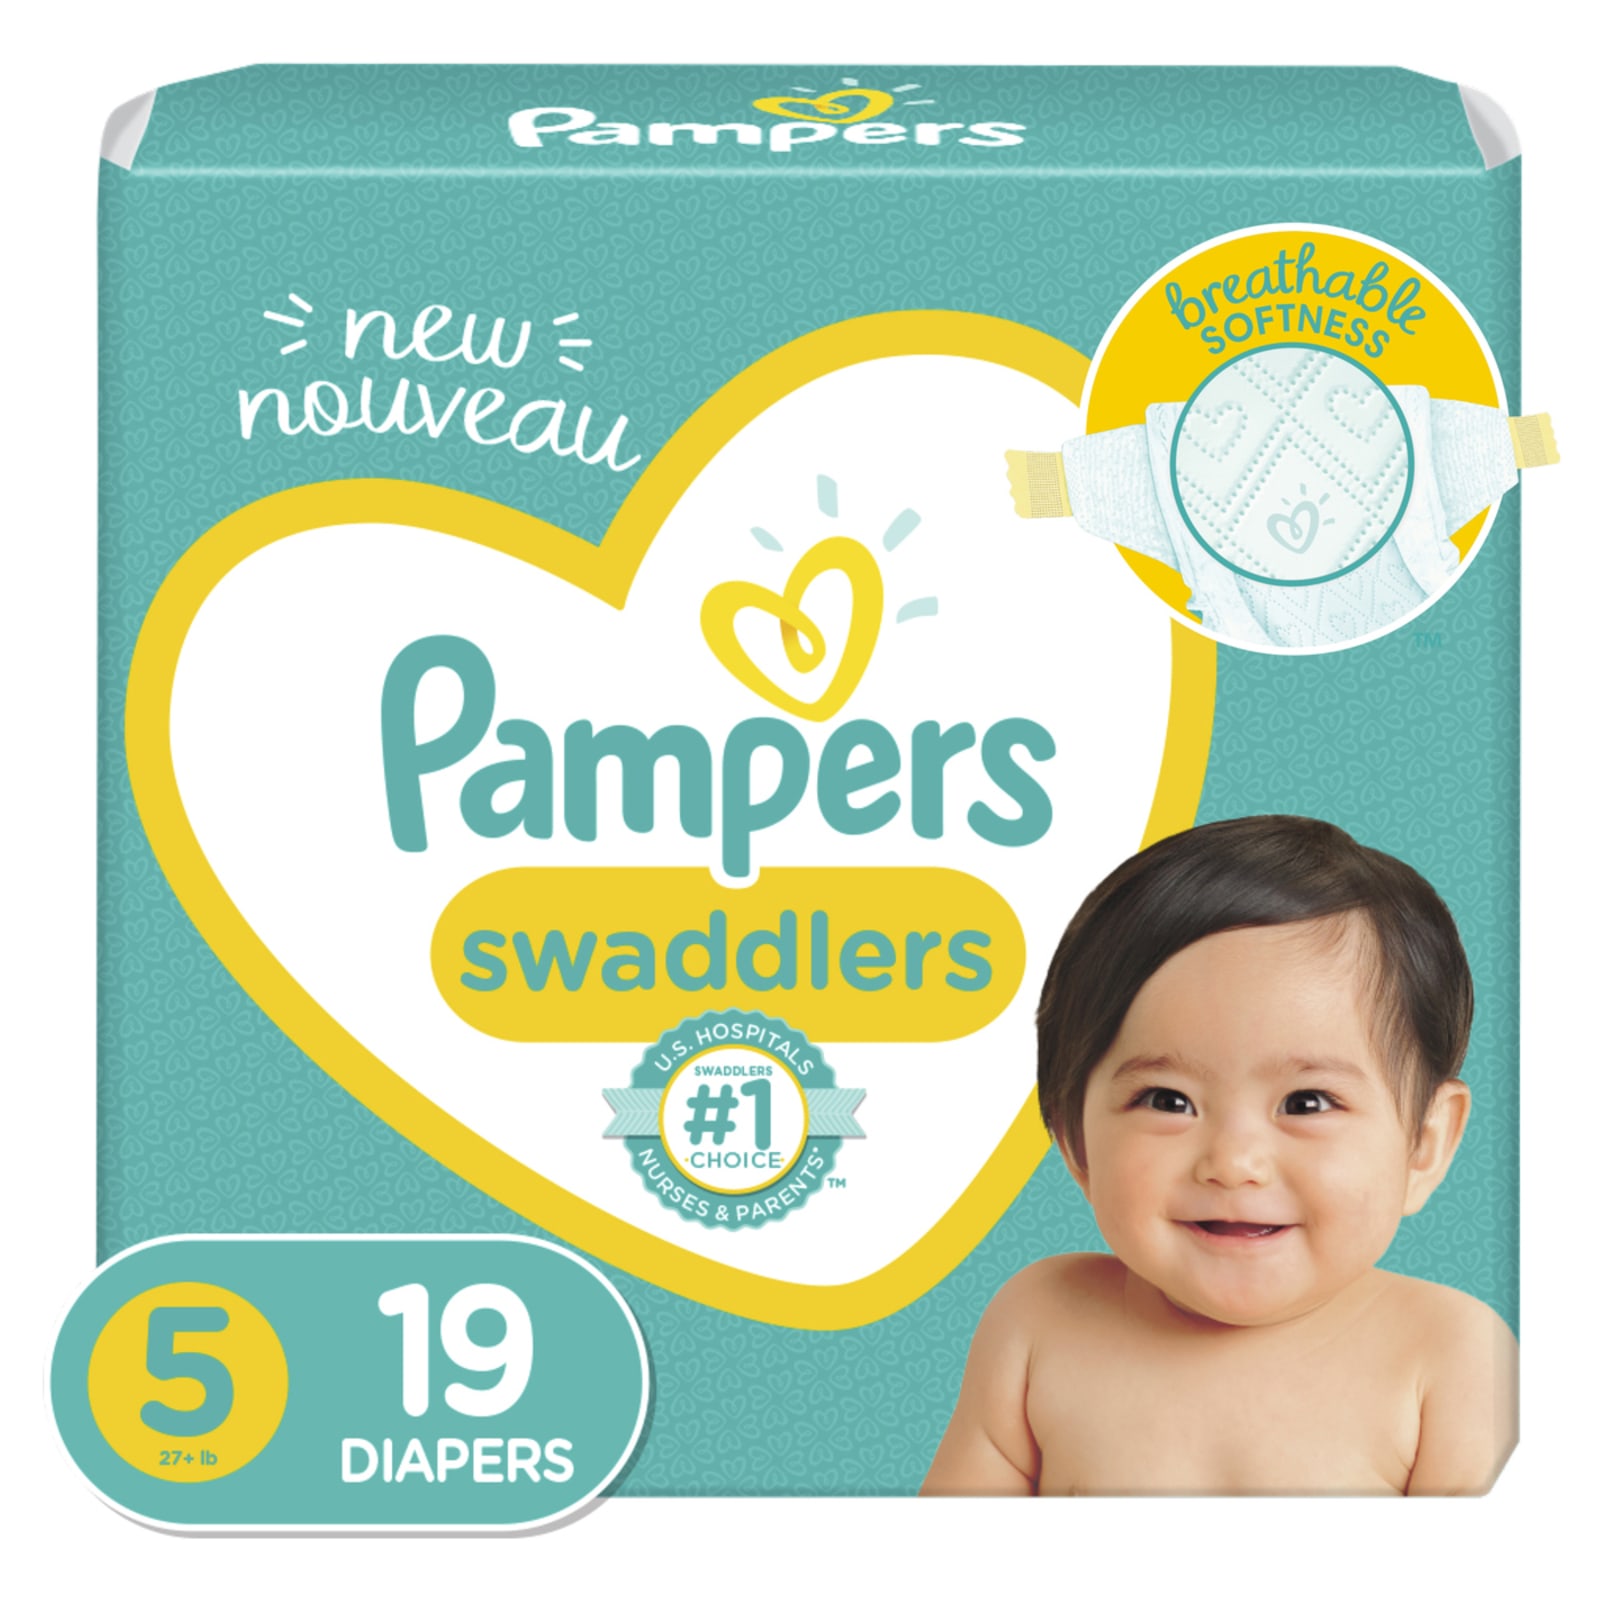 uitvinding Ontspannend Slechte factor Pampers Swaddlers Jumbo Pack Size 5 Diapers - 19 Ct by Pampers at Fleet Farm